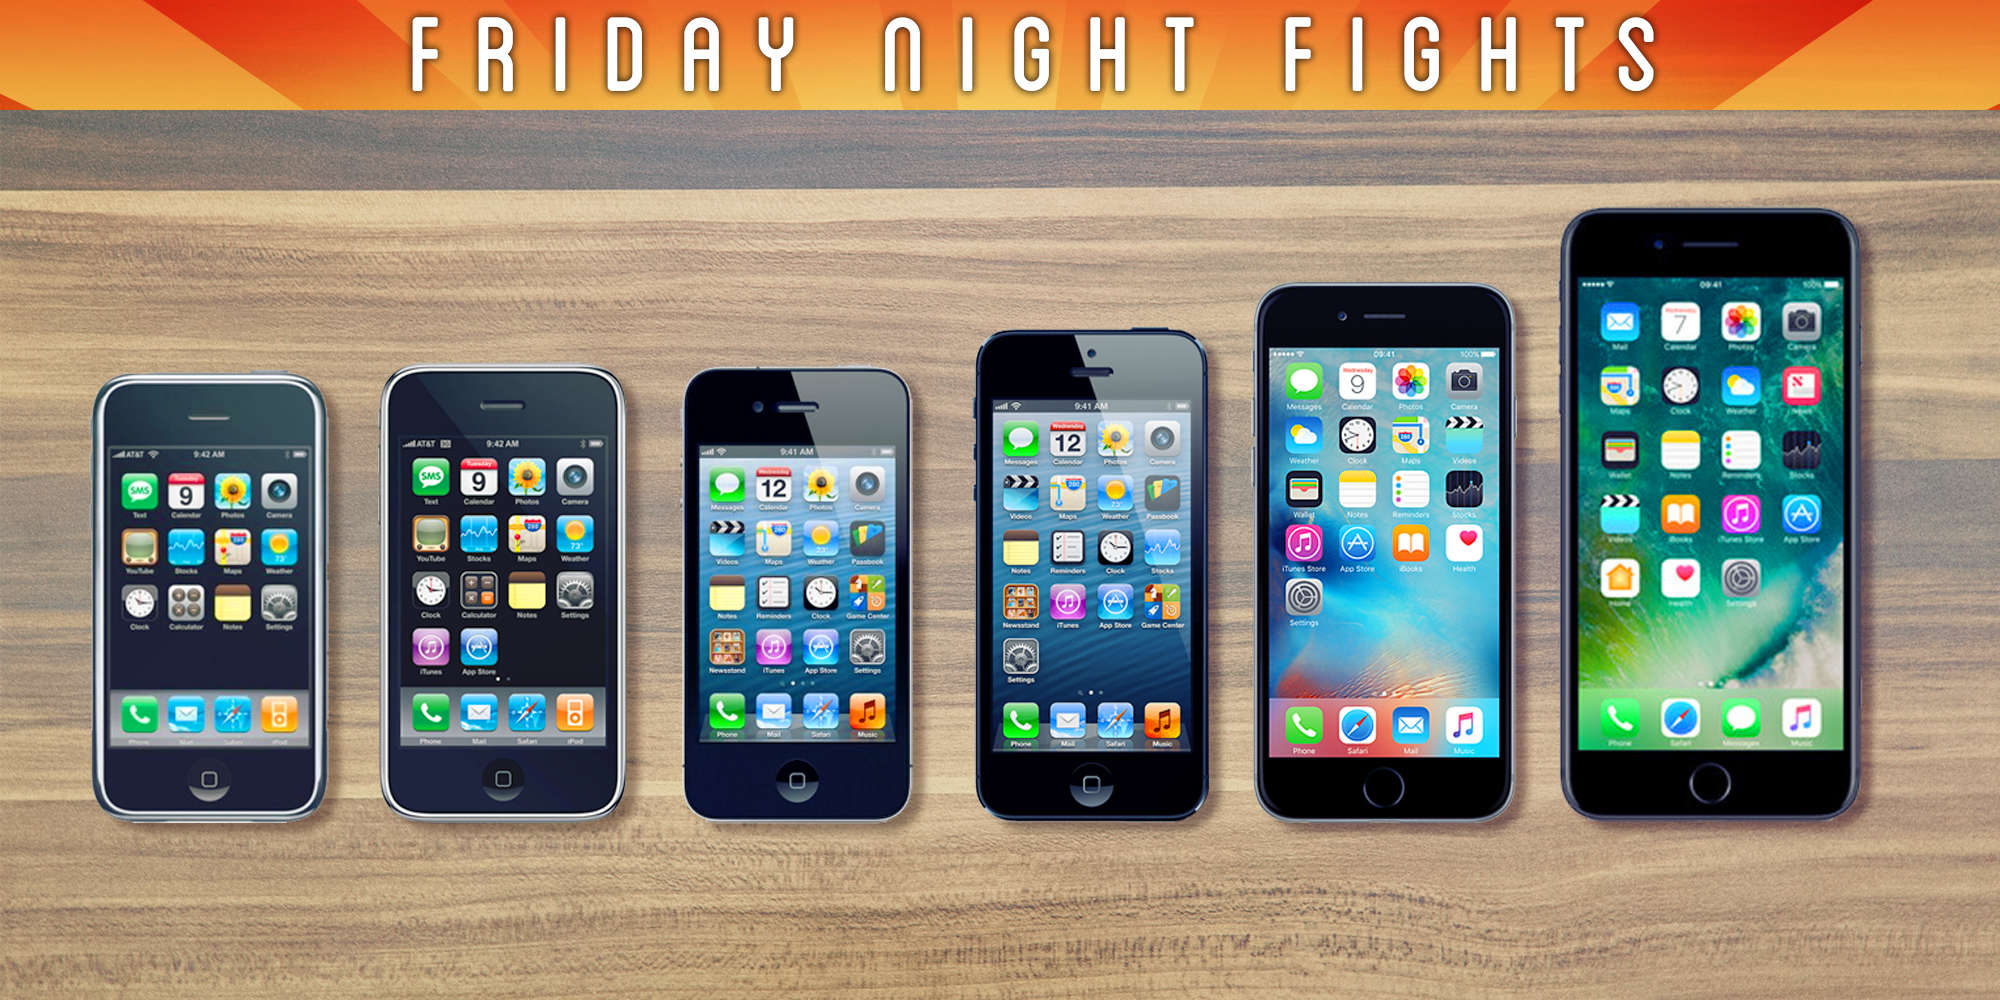 Is iPhone Apple's most significant product to date? [Friday Night Fights]